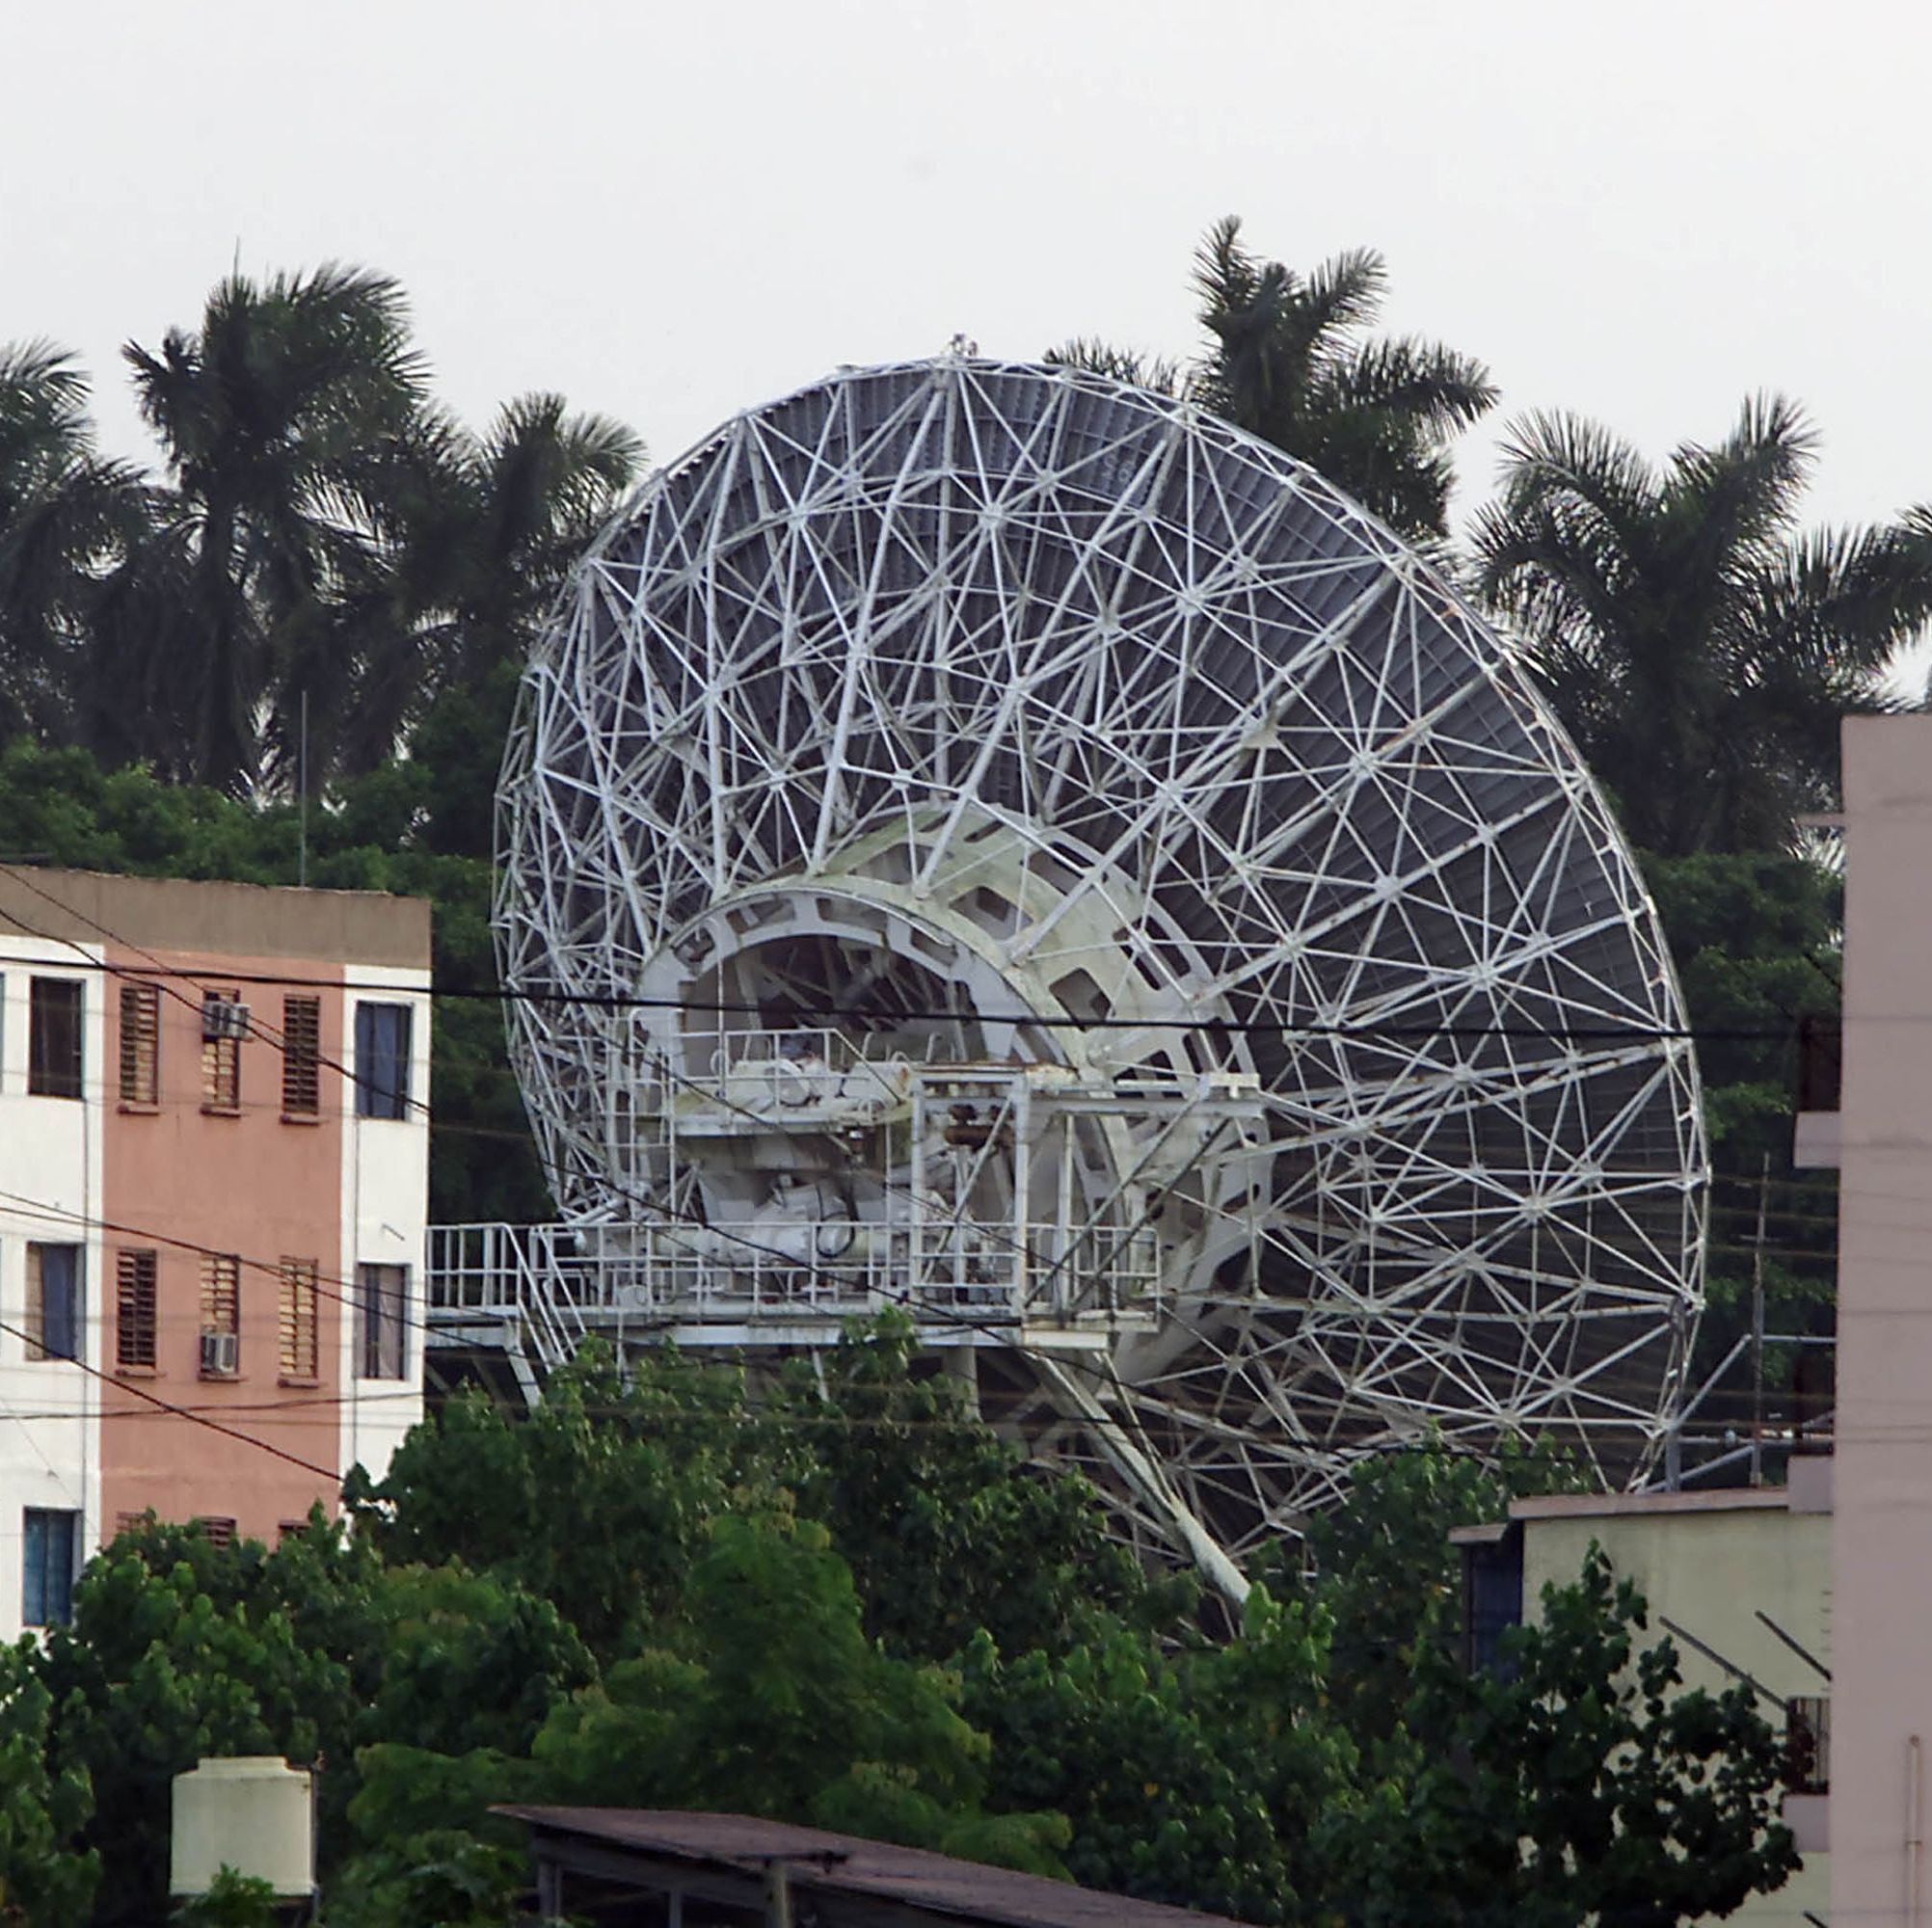 China Is Building a Secret New Intelligence Base Dedicated to Spying on the U.S.